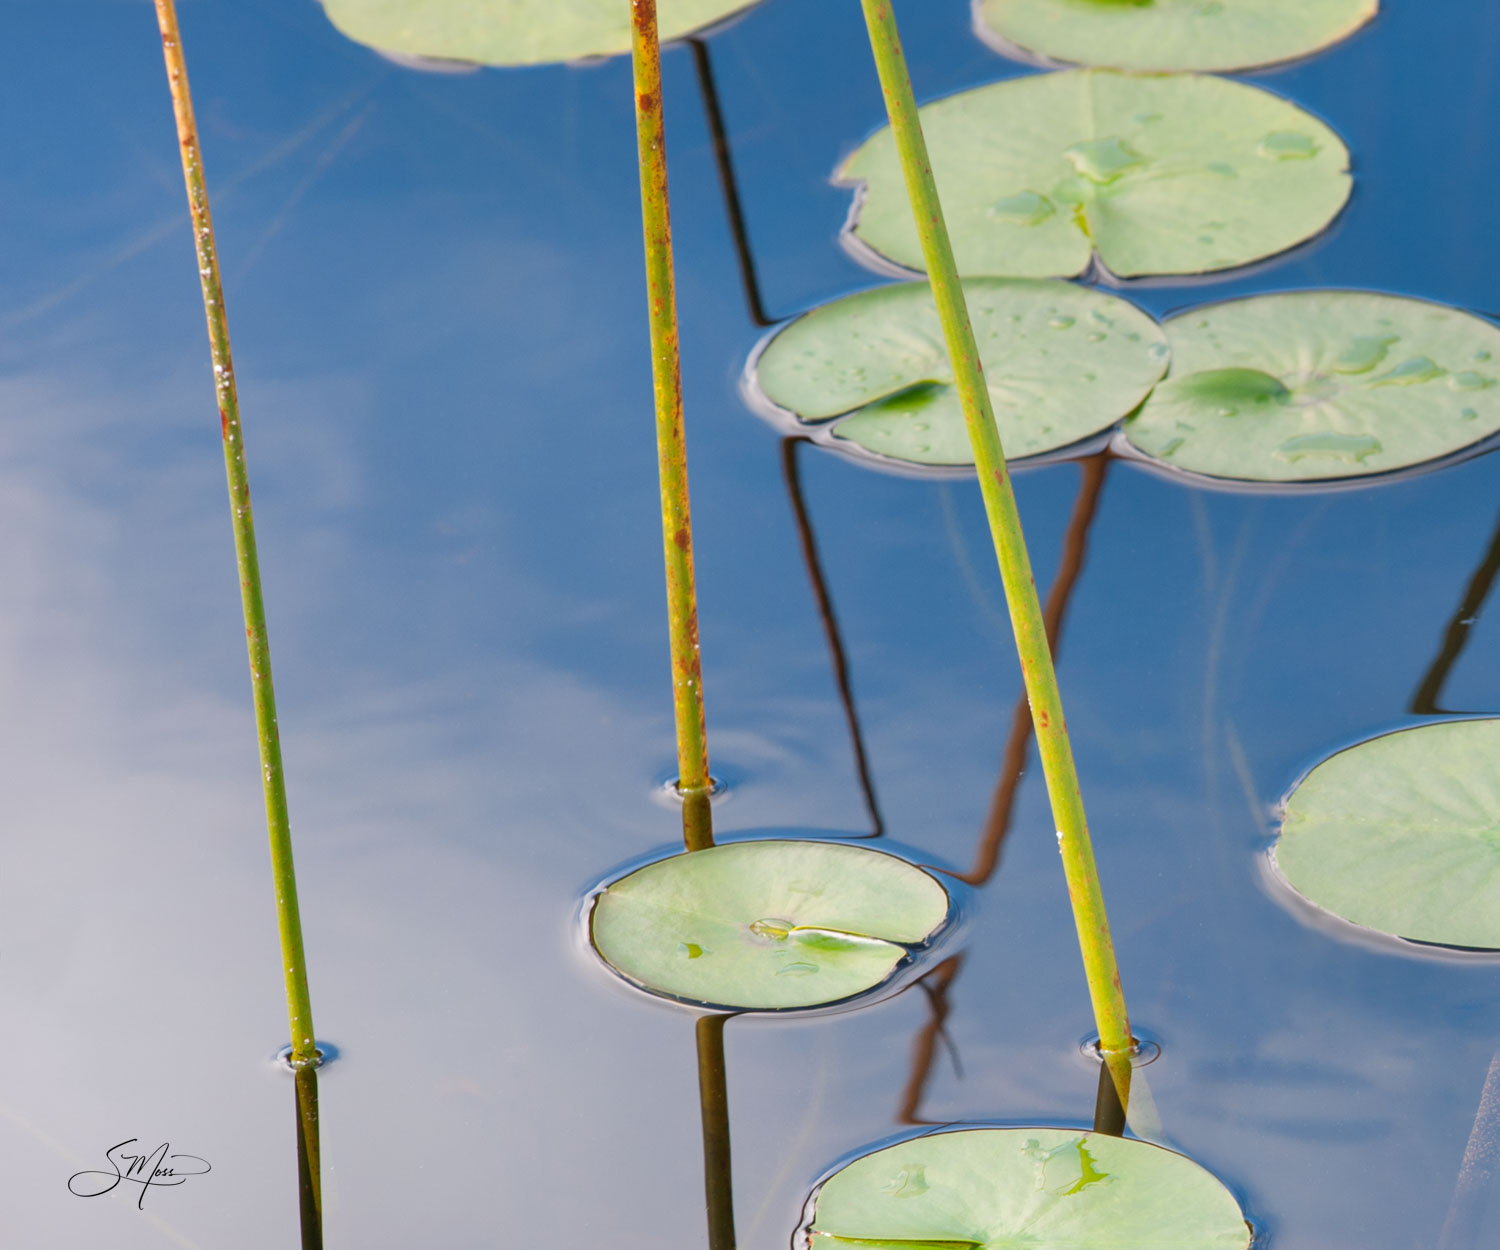 lily pads, reeds, grasses, blue water, two panels, quiet, photograph, calming, no people, close-up, green, peaceful, serene...